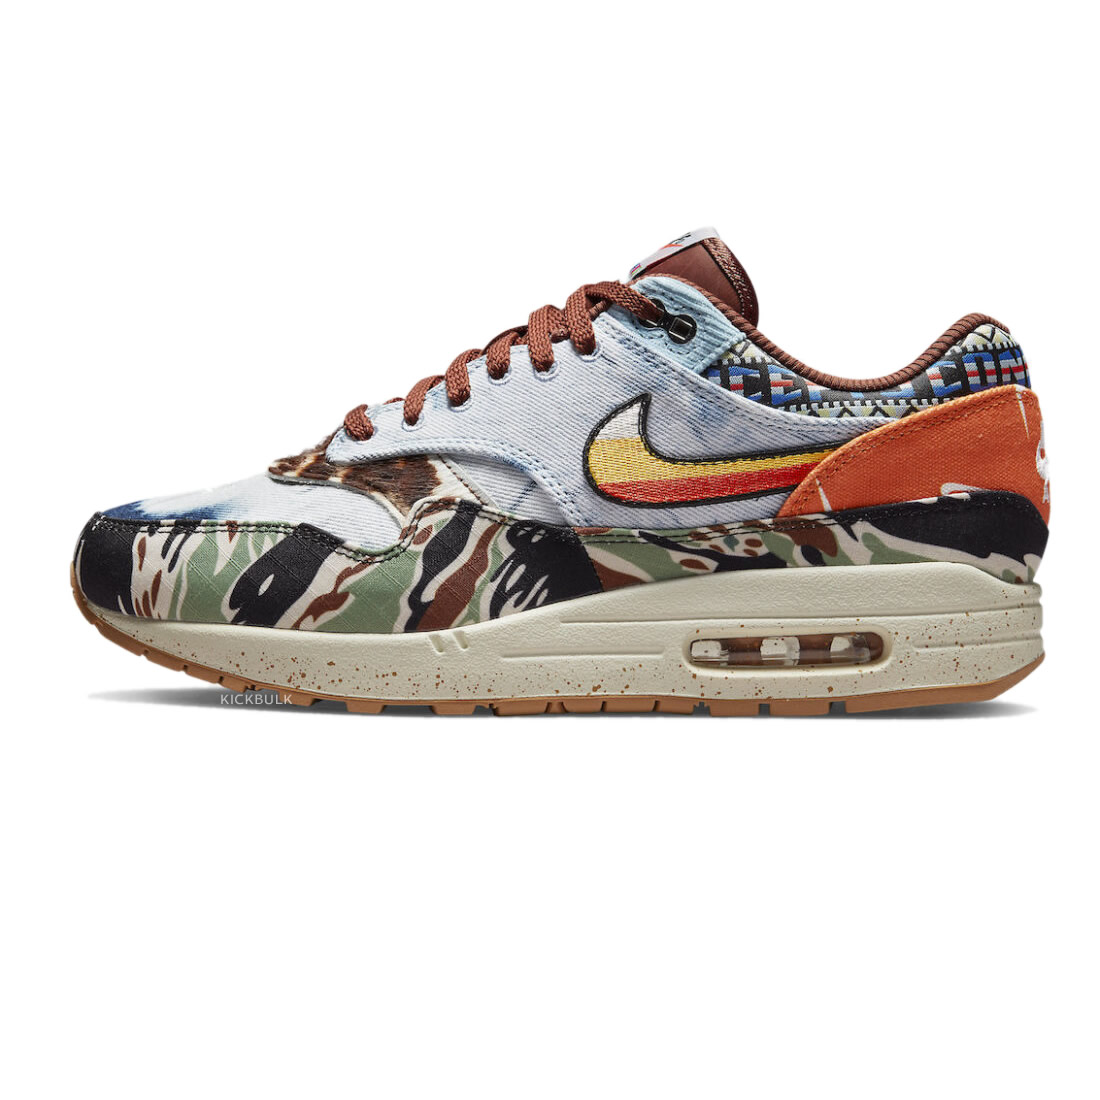 Concepts womens camouflage nike shox shoes sneakers Sp Heavy Special Box 2022 Dn1803 900 1 - www.kickbulk.co